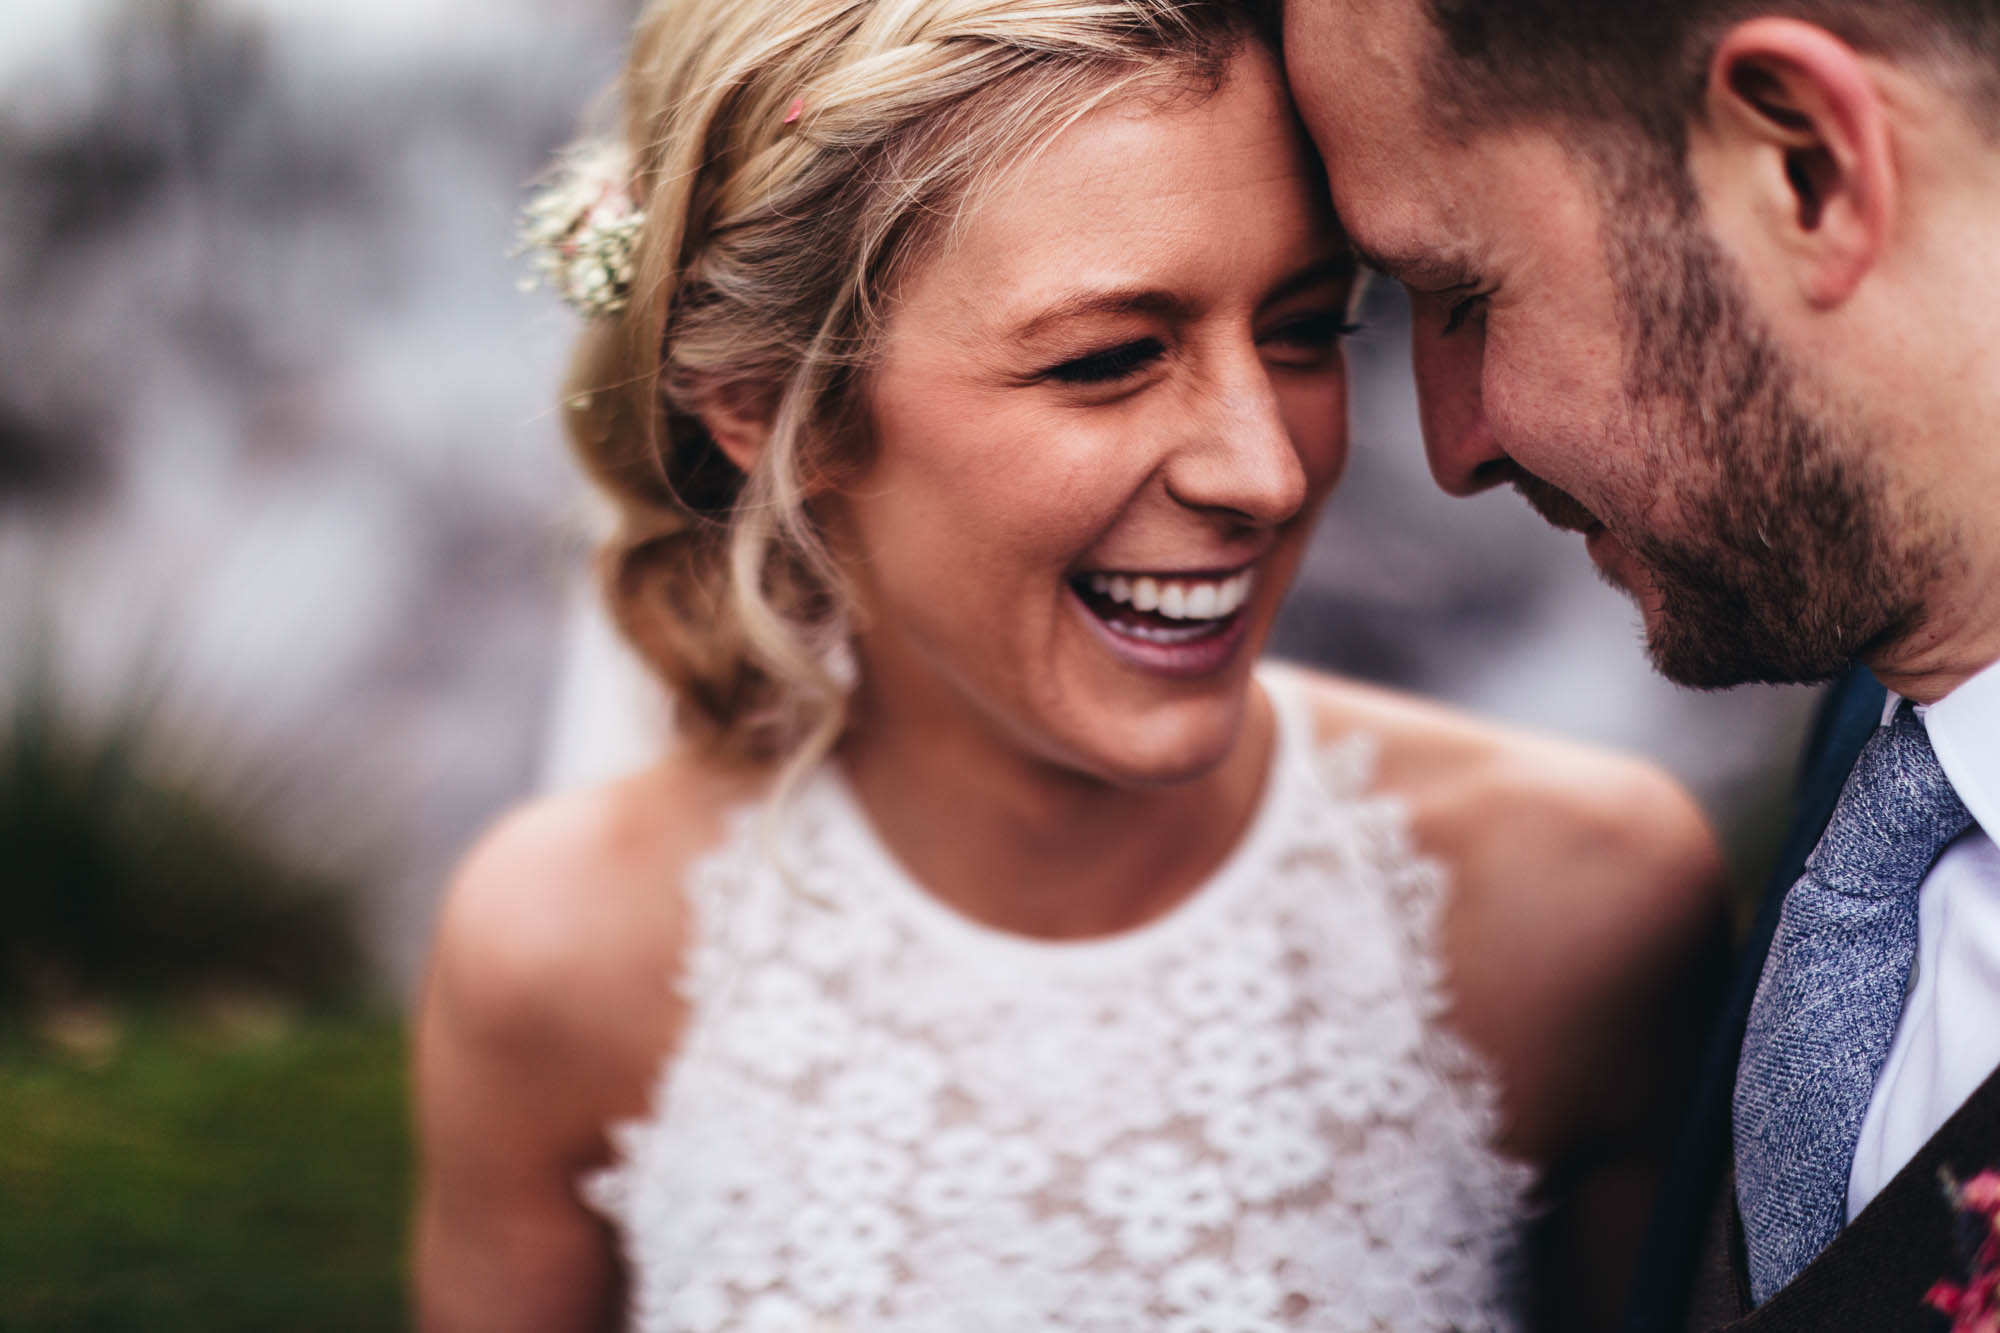 Close up shot of intimate moment between Bride and Groom amongst lush green grass